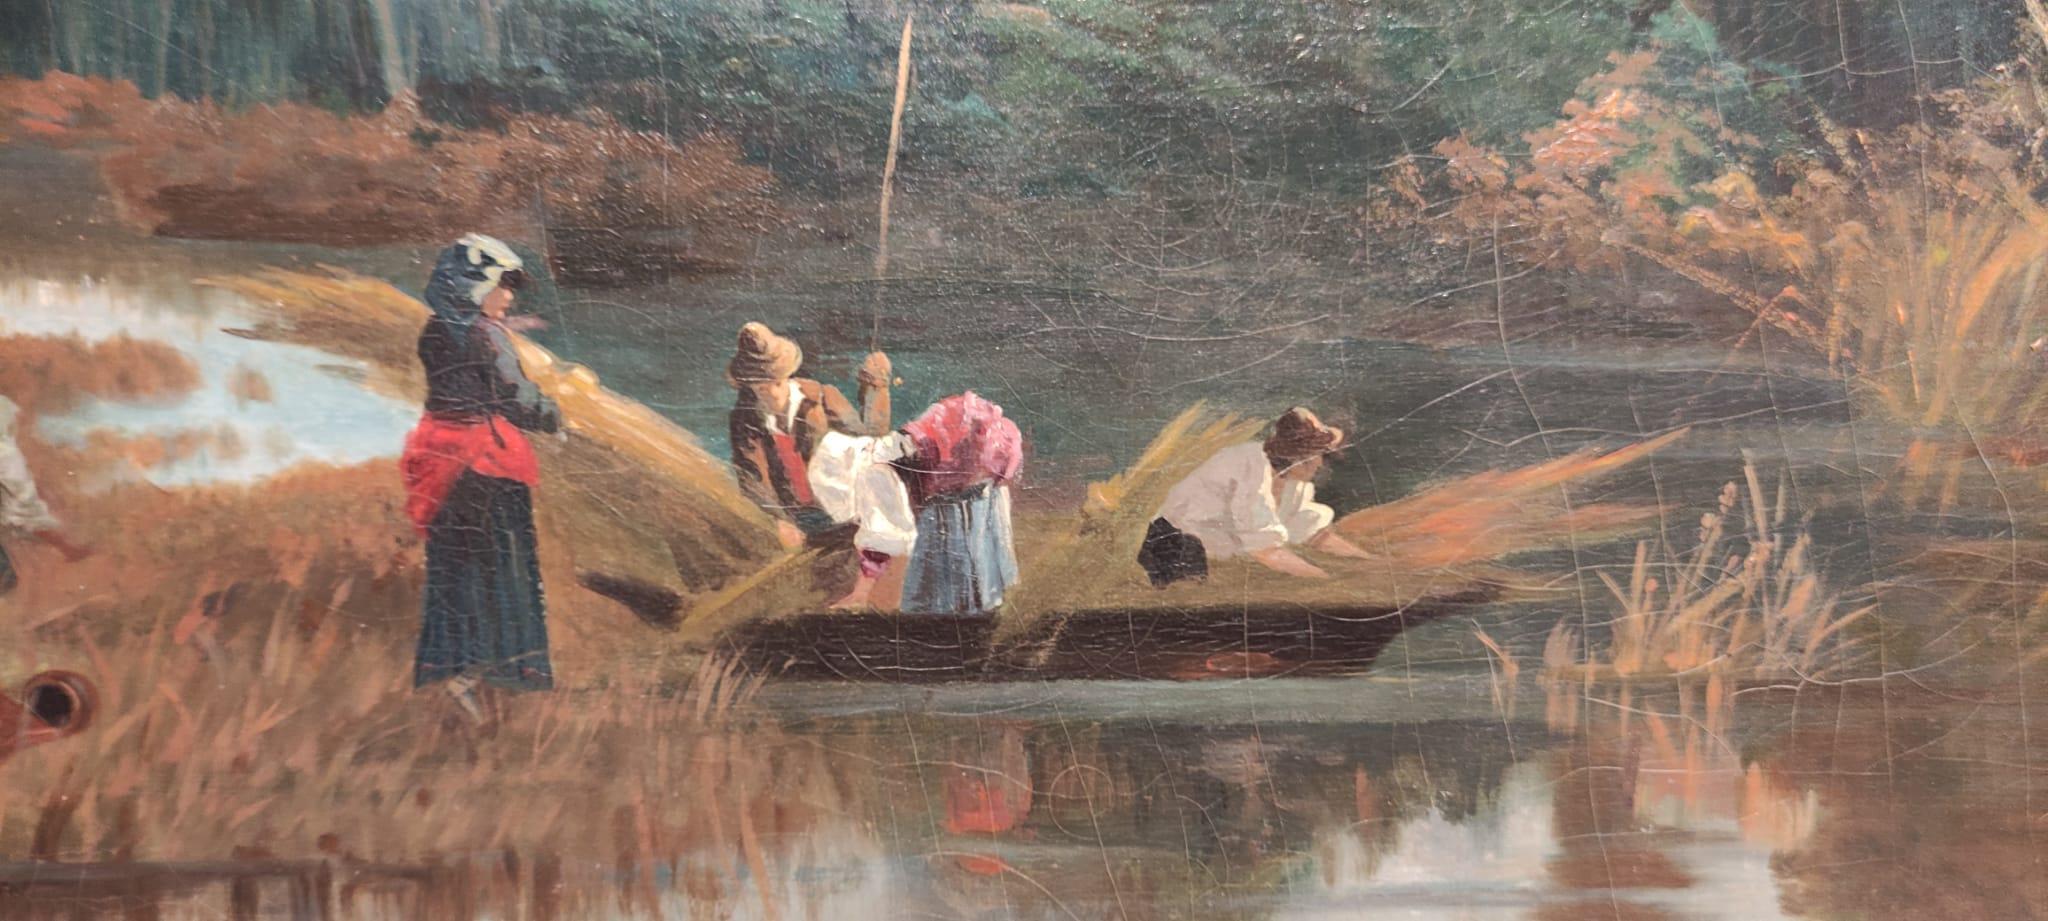 River scene at sunset with figures gathering reeds For Sale 7